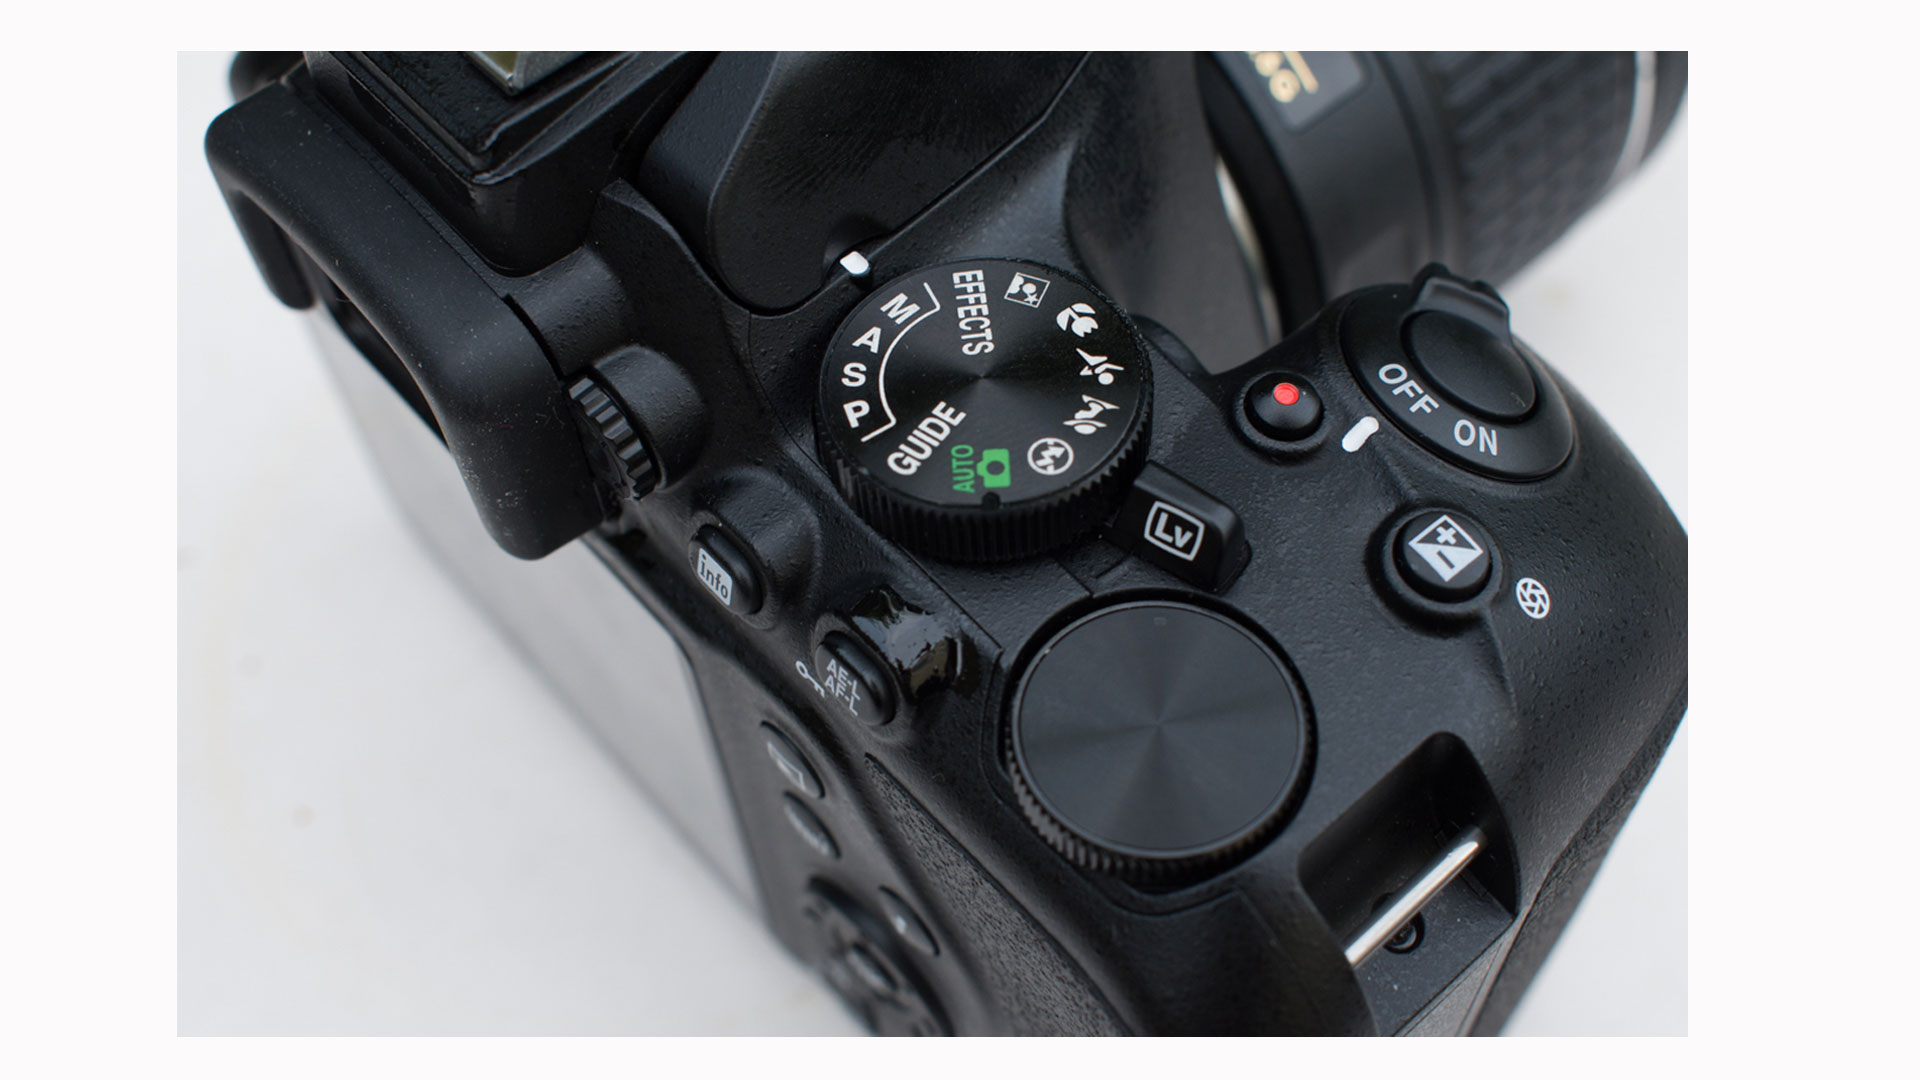 Image shows a closeup view of the controls and dials on the Nikon D3500.